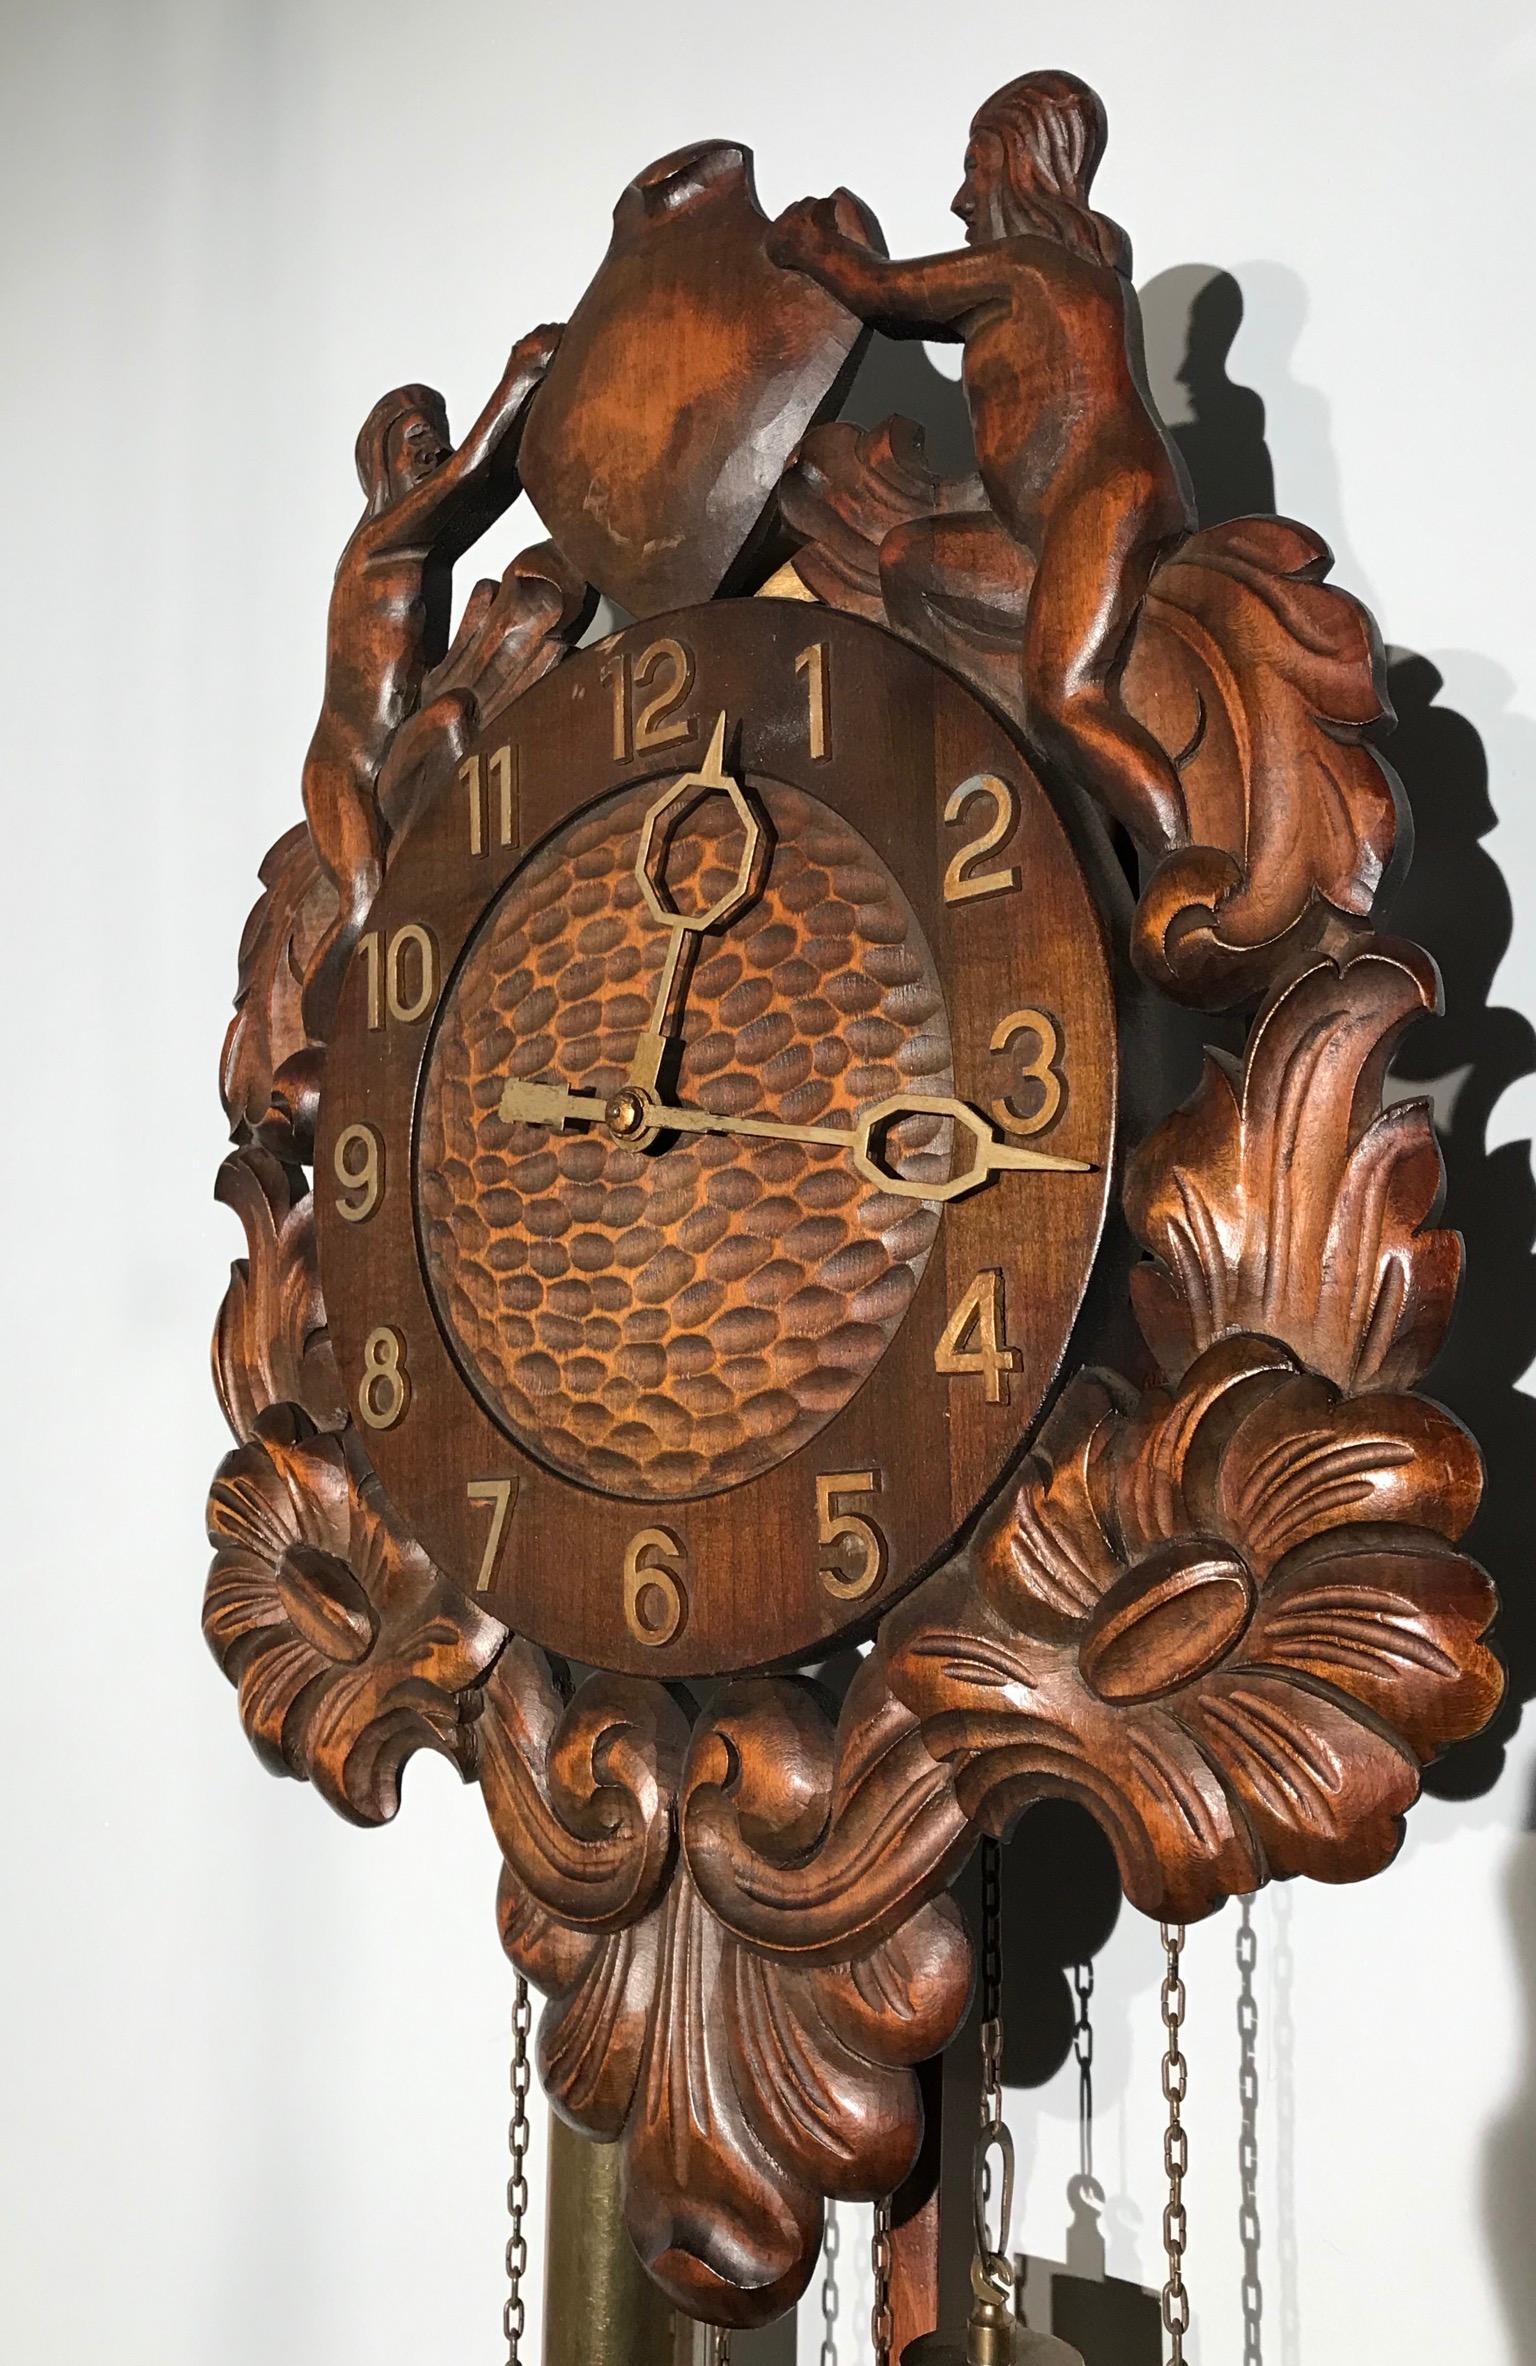 Unique Denmark Made Classical Roman Wall Clock with Sculptures and Flowers For Sale 11